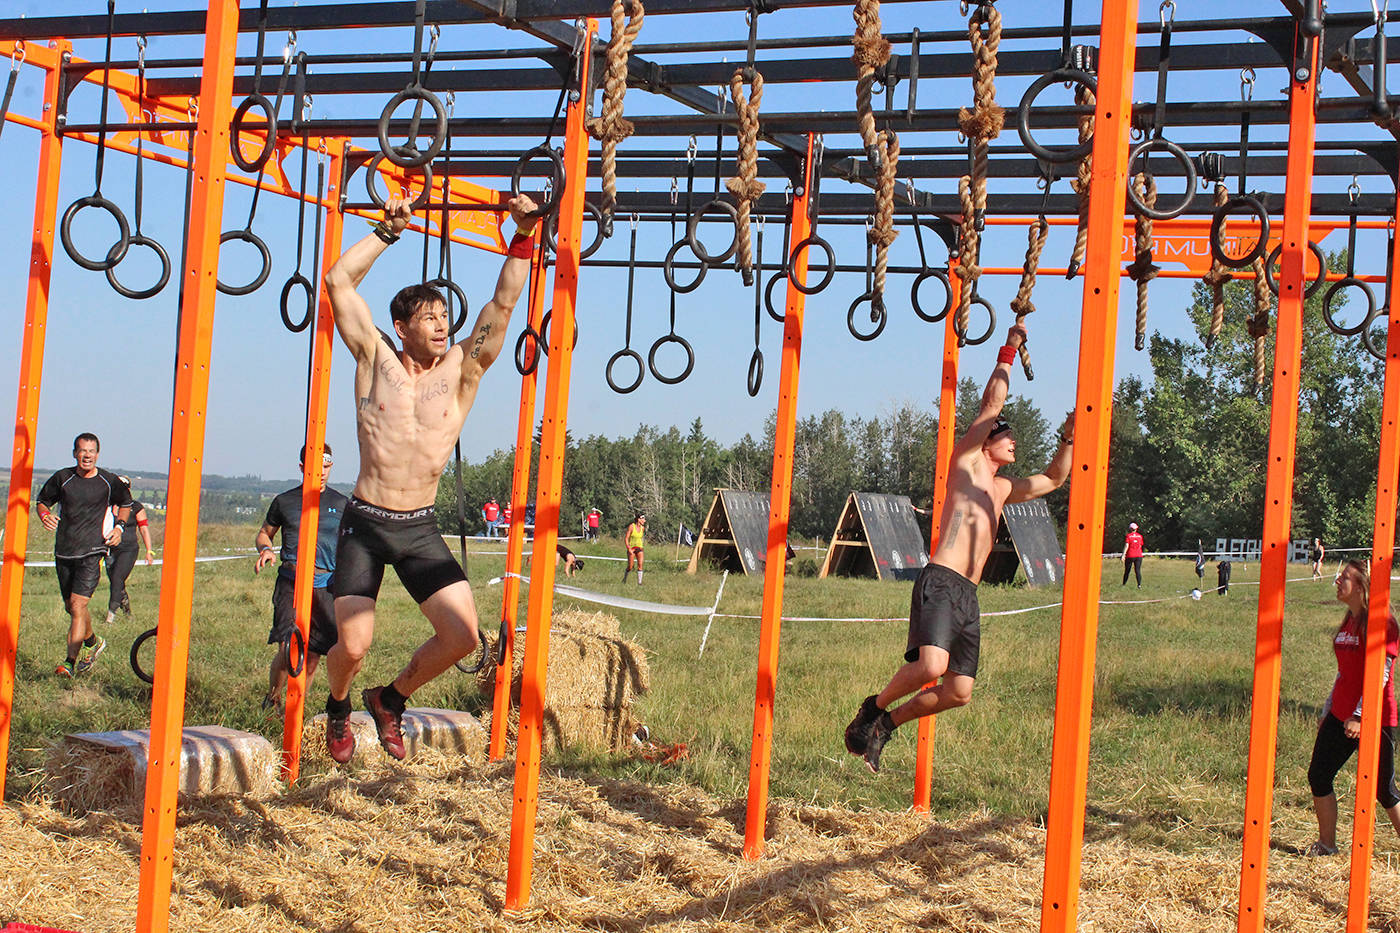 Video: Thousands challenge themselves in this year’s Spartan Race